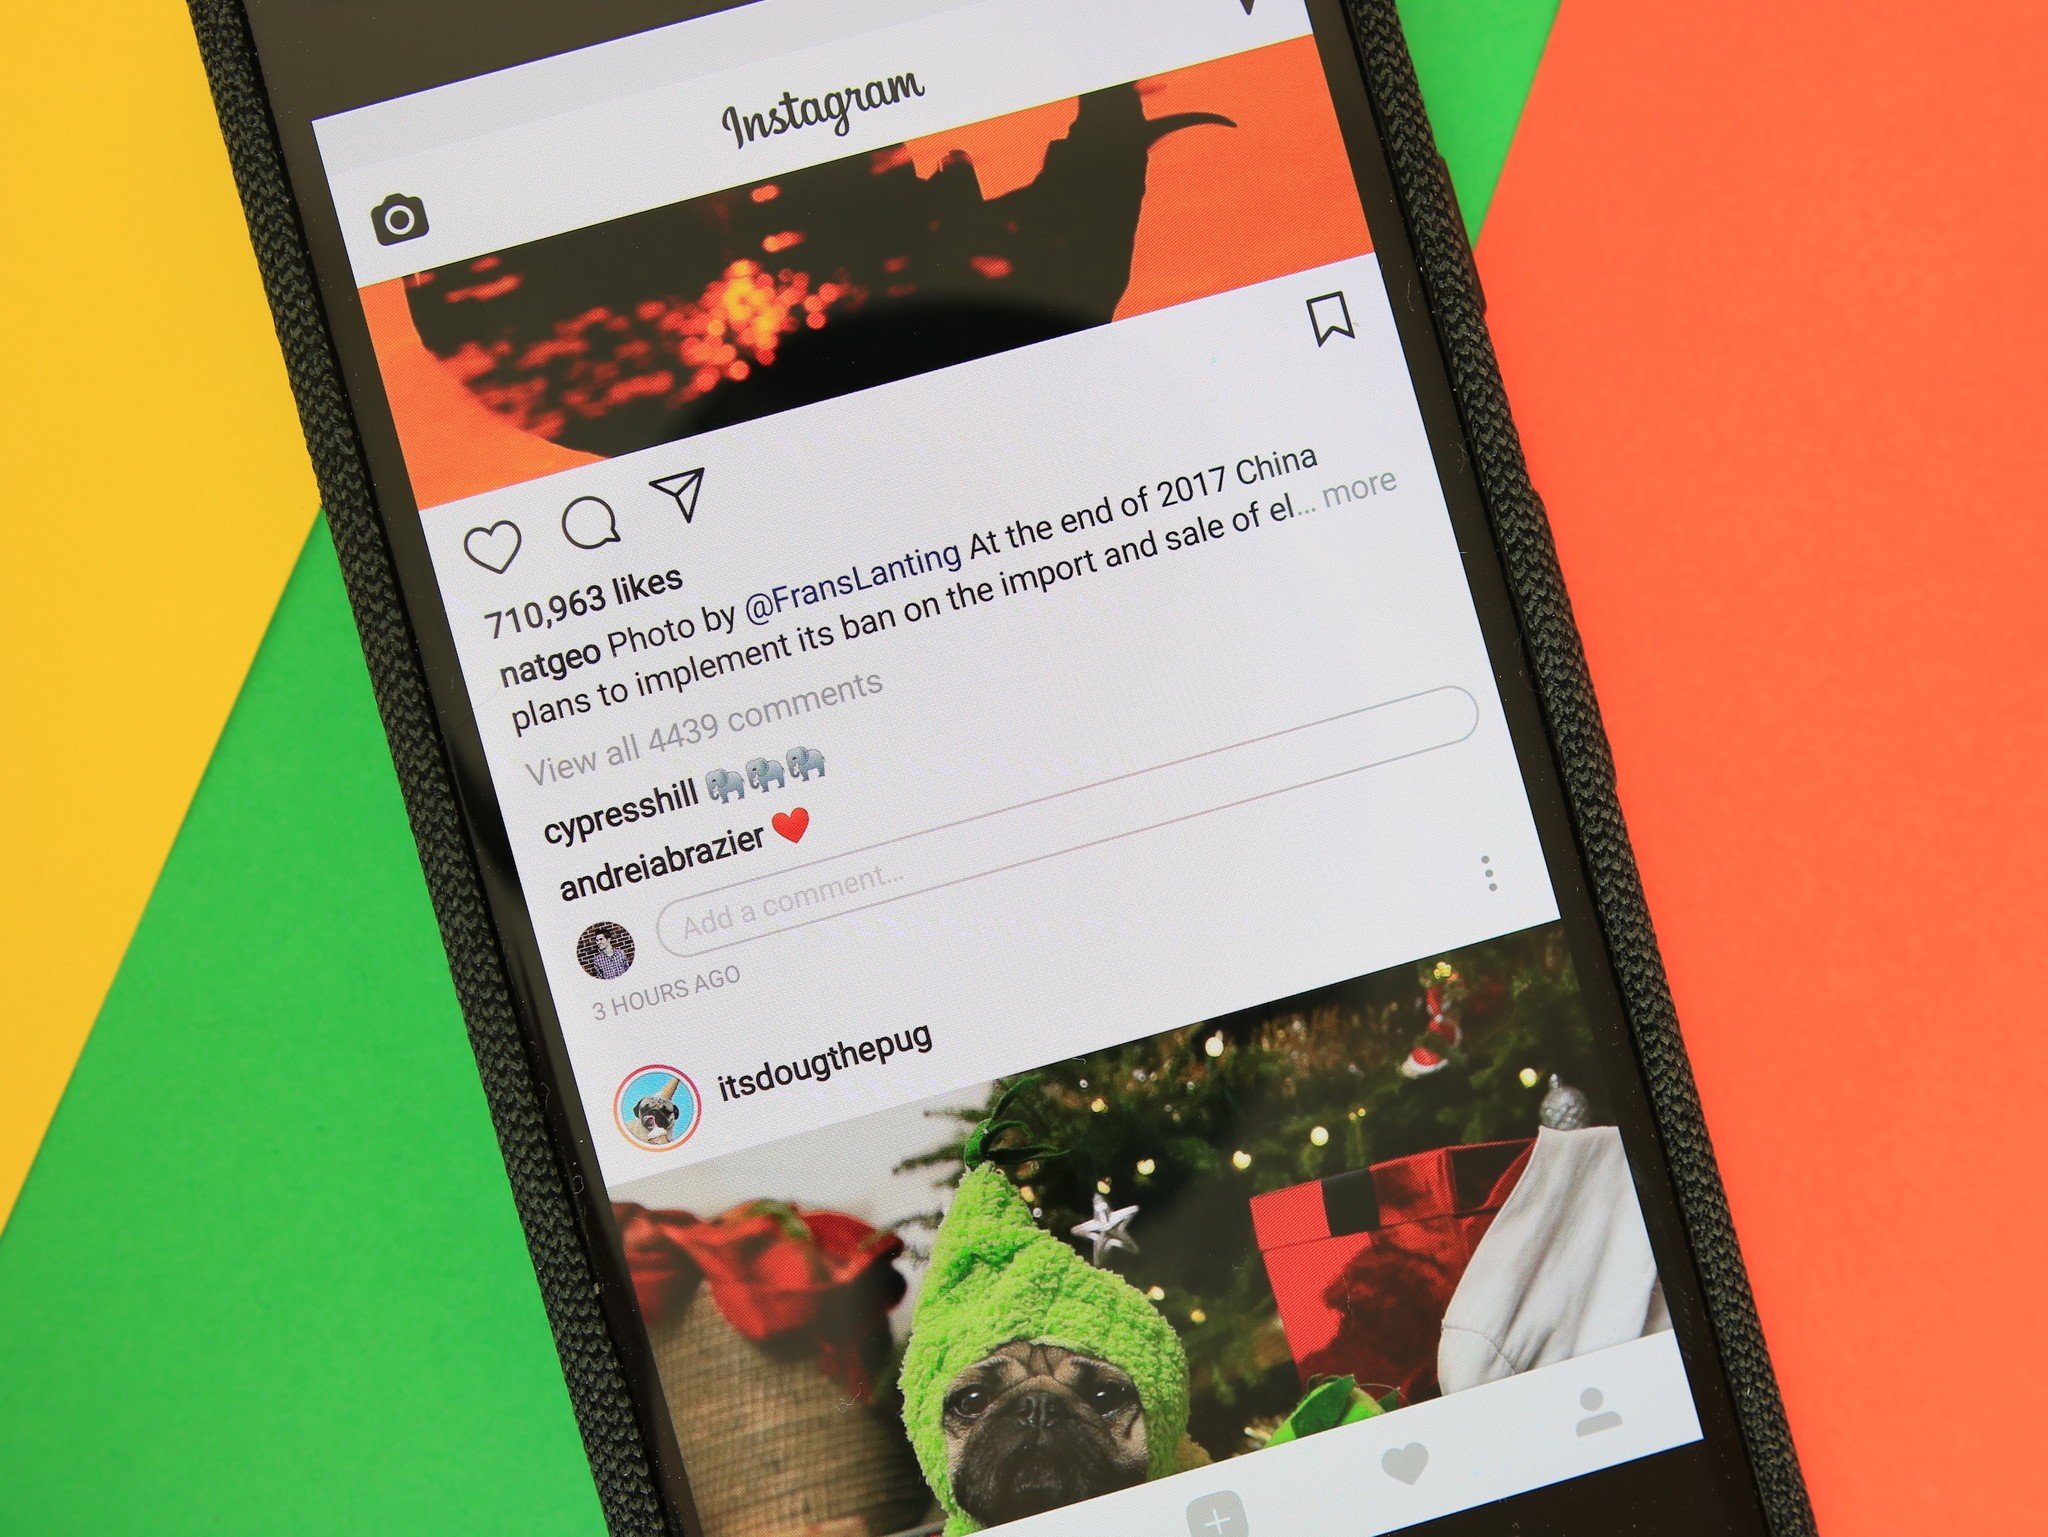 Instagram's code reveals potential voice and video calling features